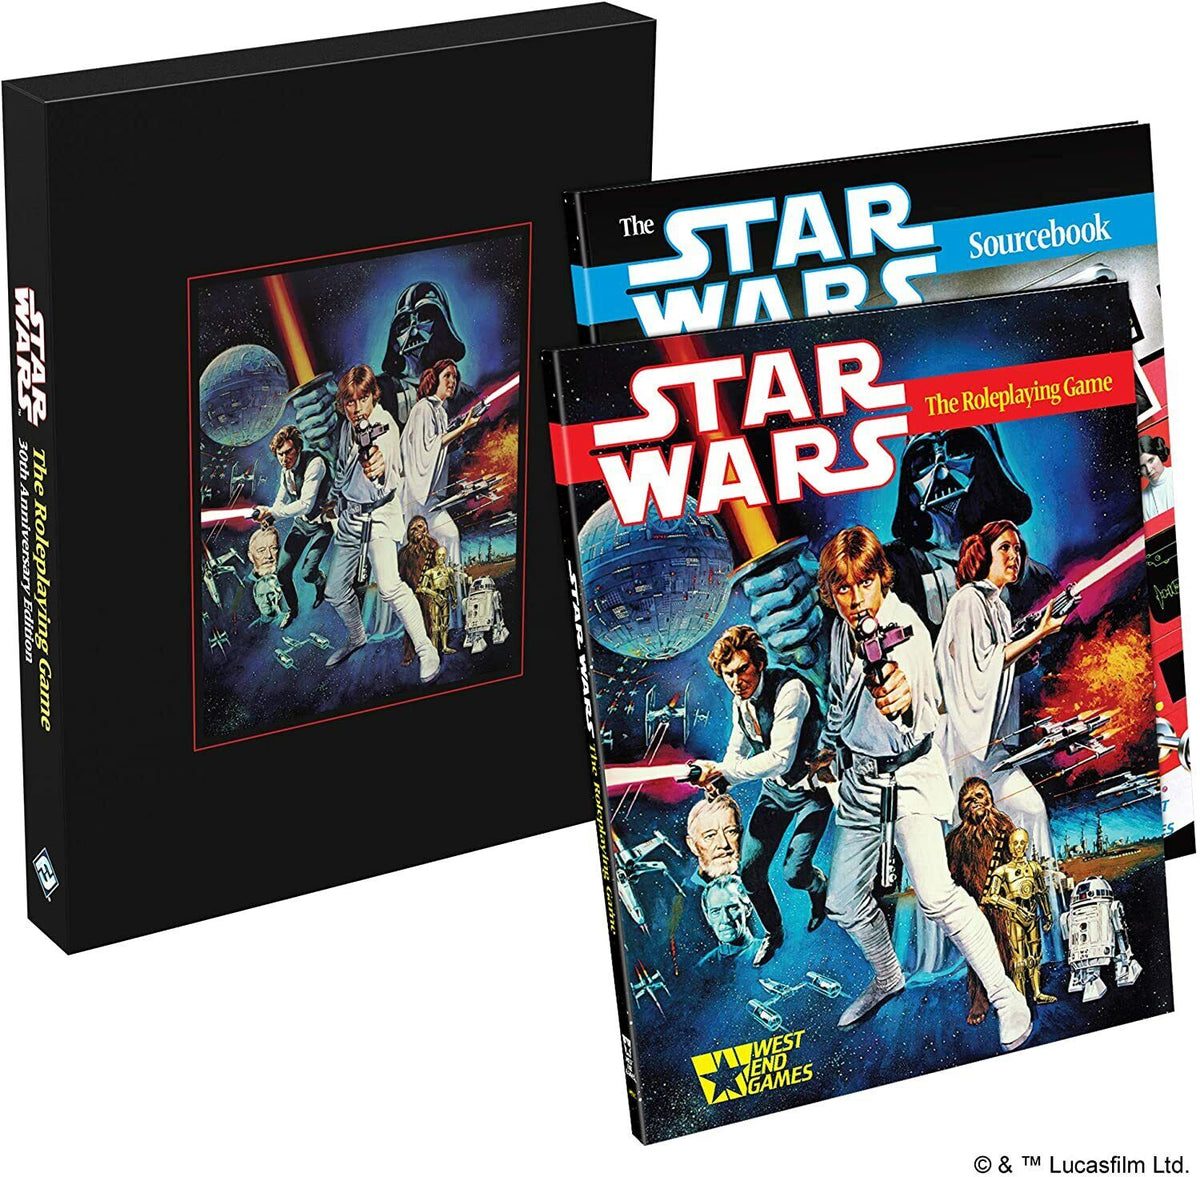 Star Wars: The Roleplaying Game - 30th Anniversary Edition